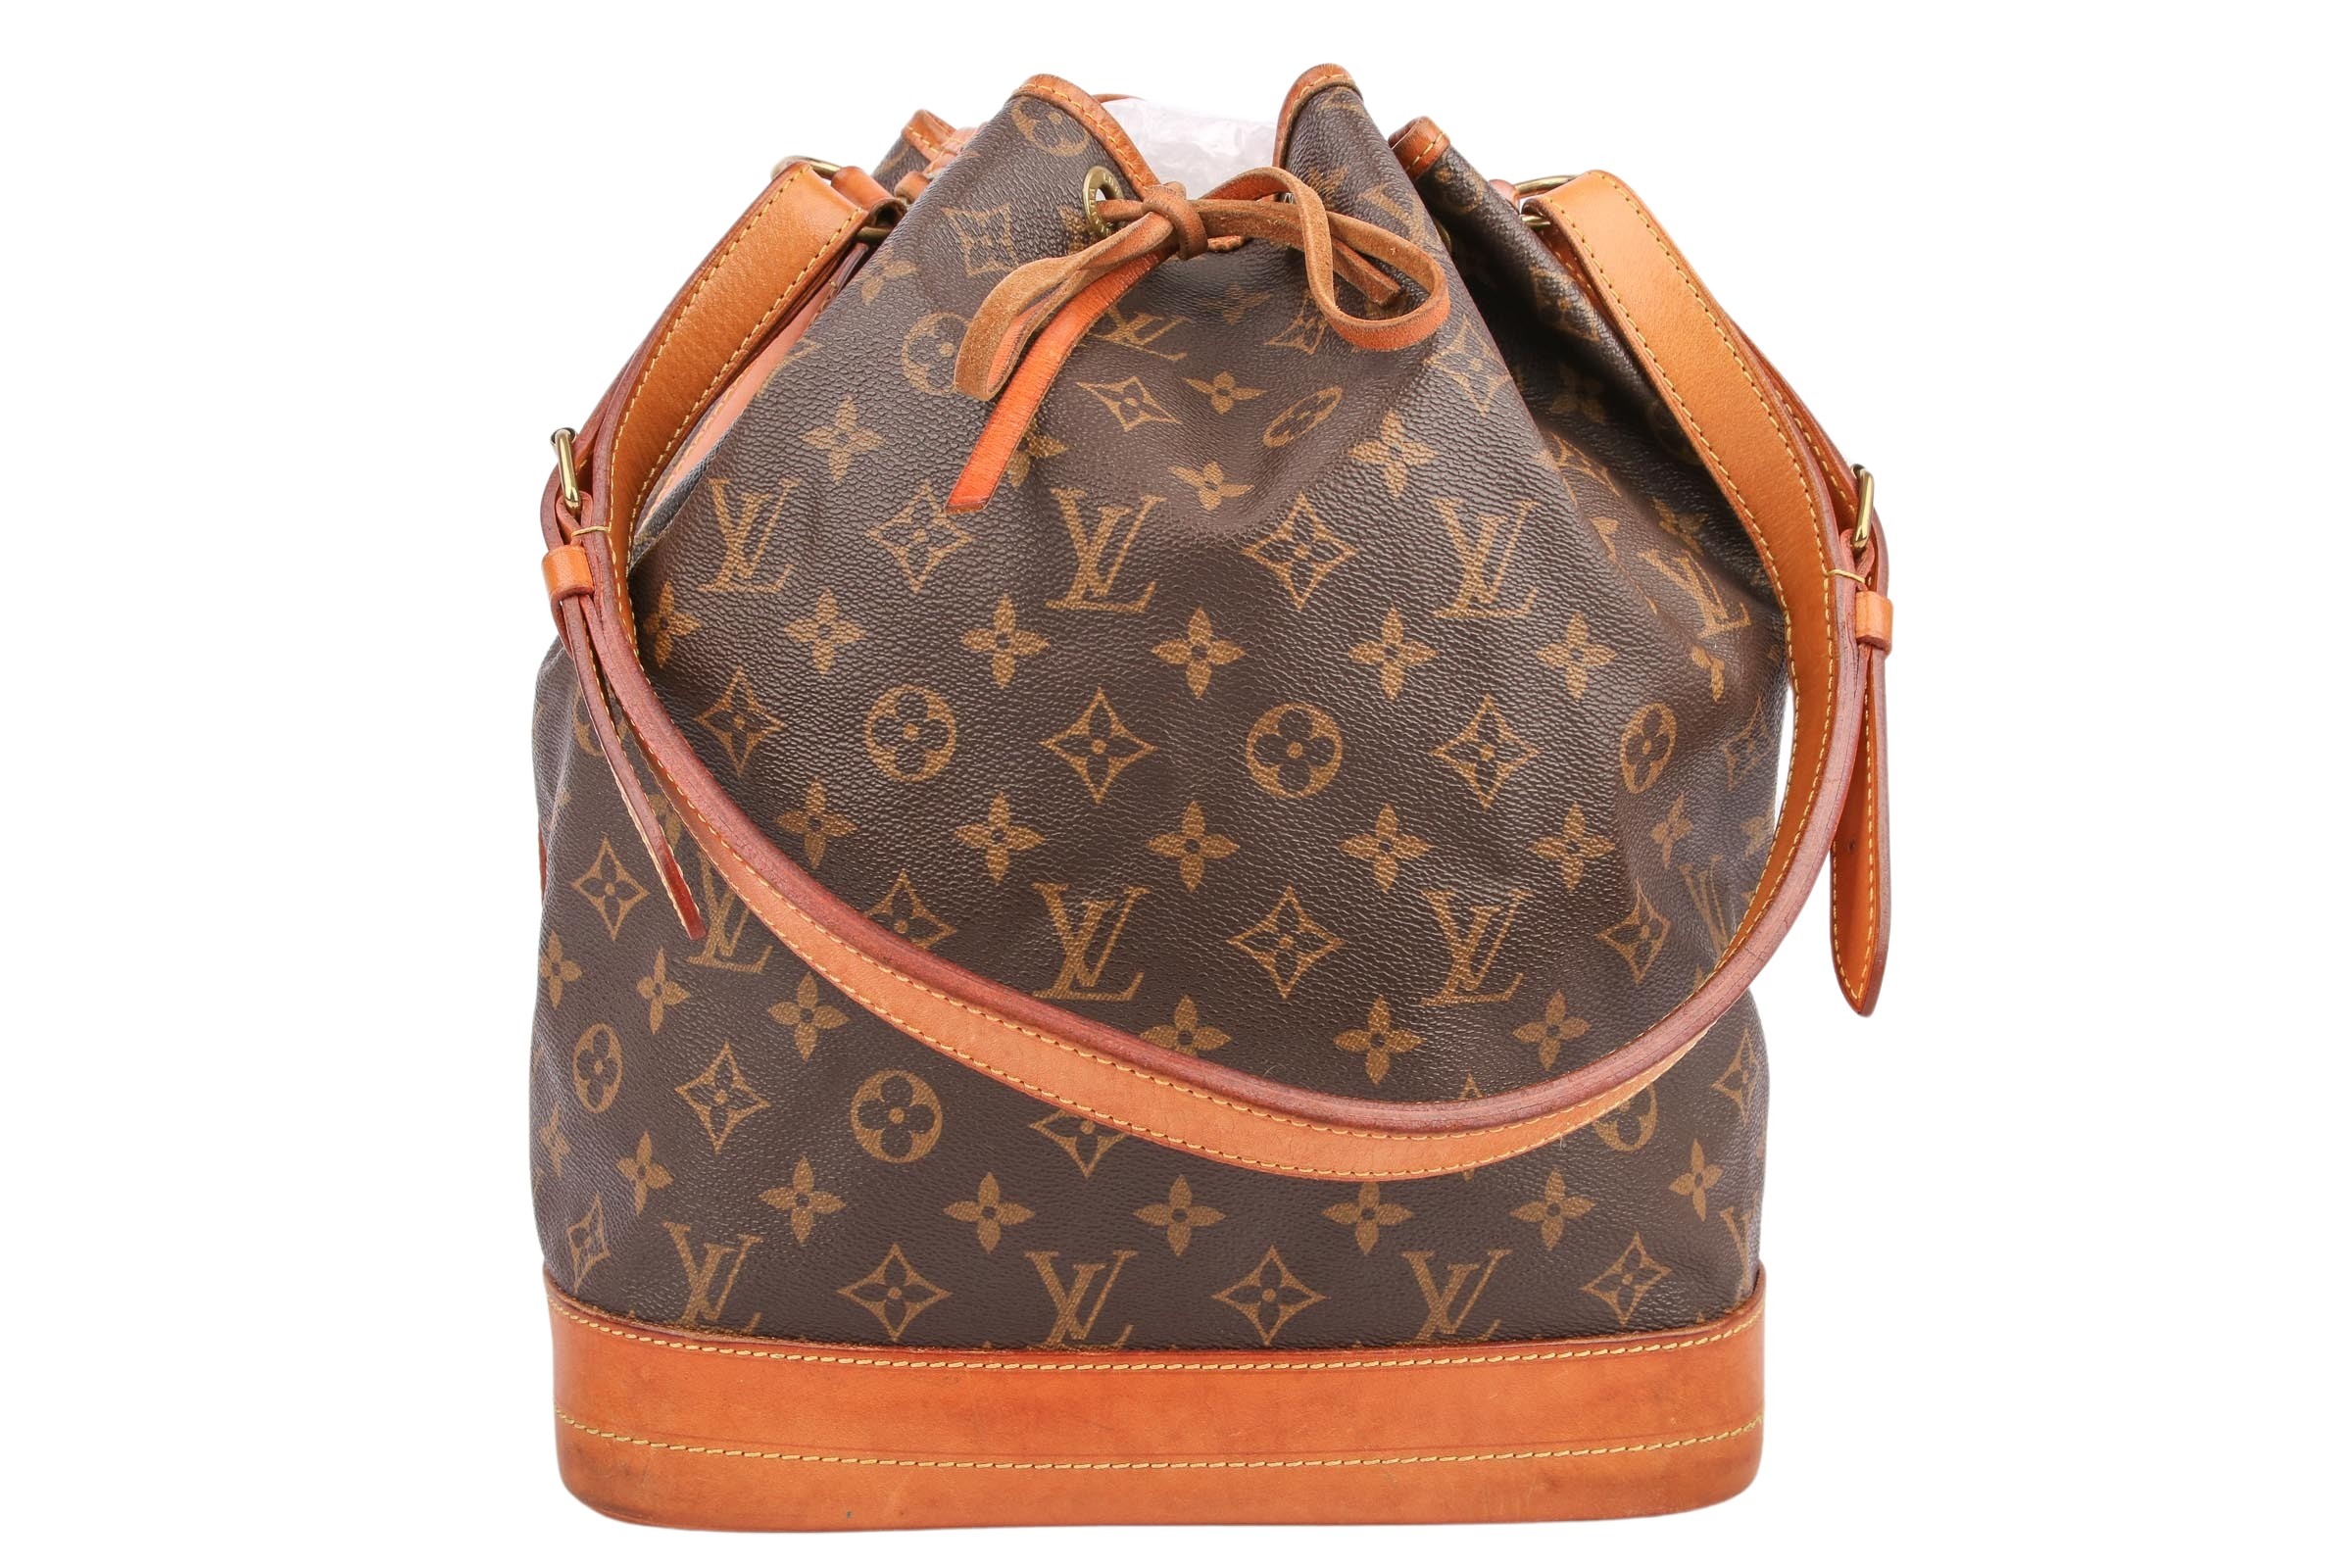 Louis Vuitton Monogram Canvas Keepall Bandouliere 50 Bag Marc by Marc  Jacobs | The Luxury Closet